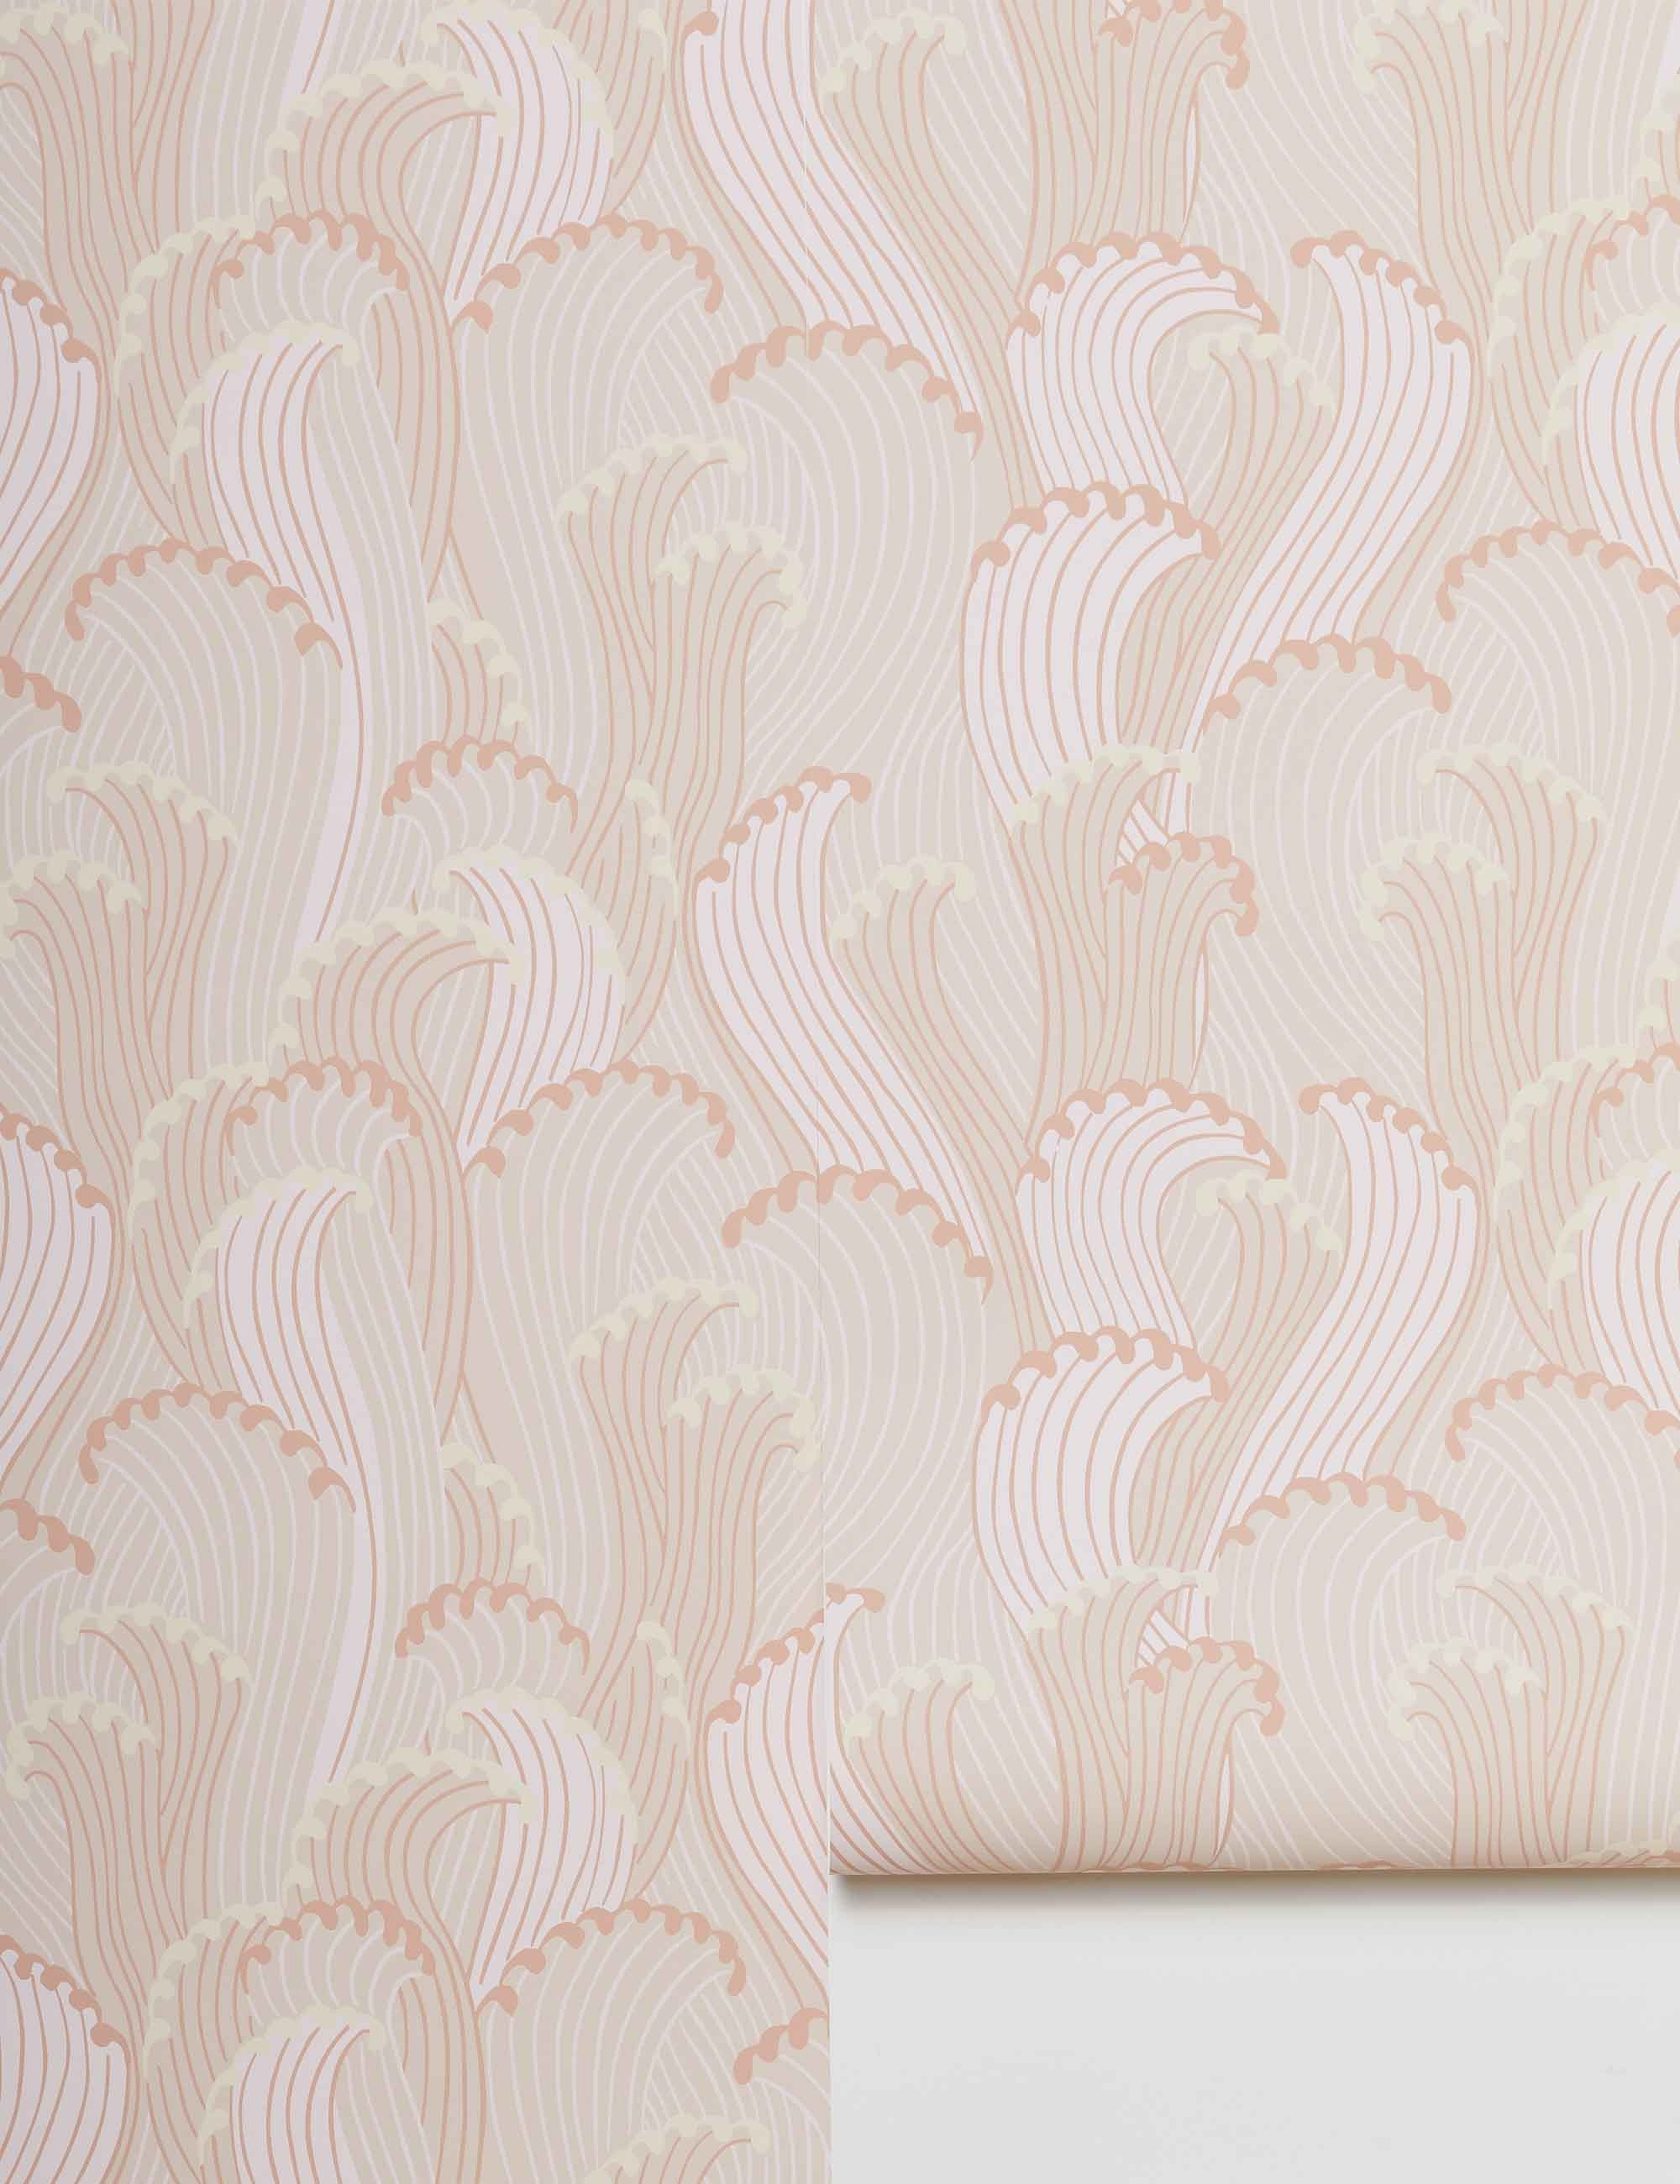 Pastel Waves Wallpaper by Taylor Sterling - Lulu and Georgia